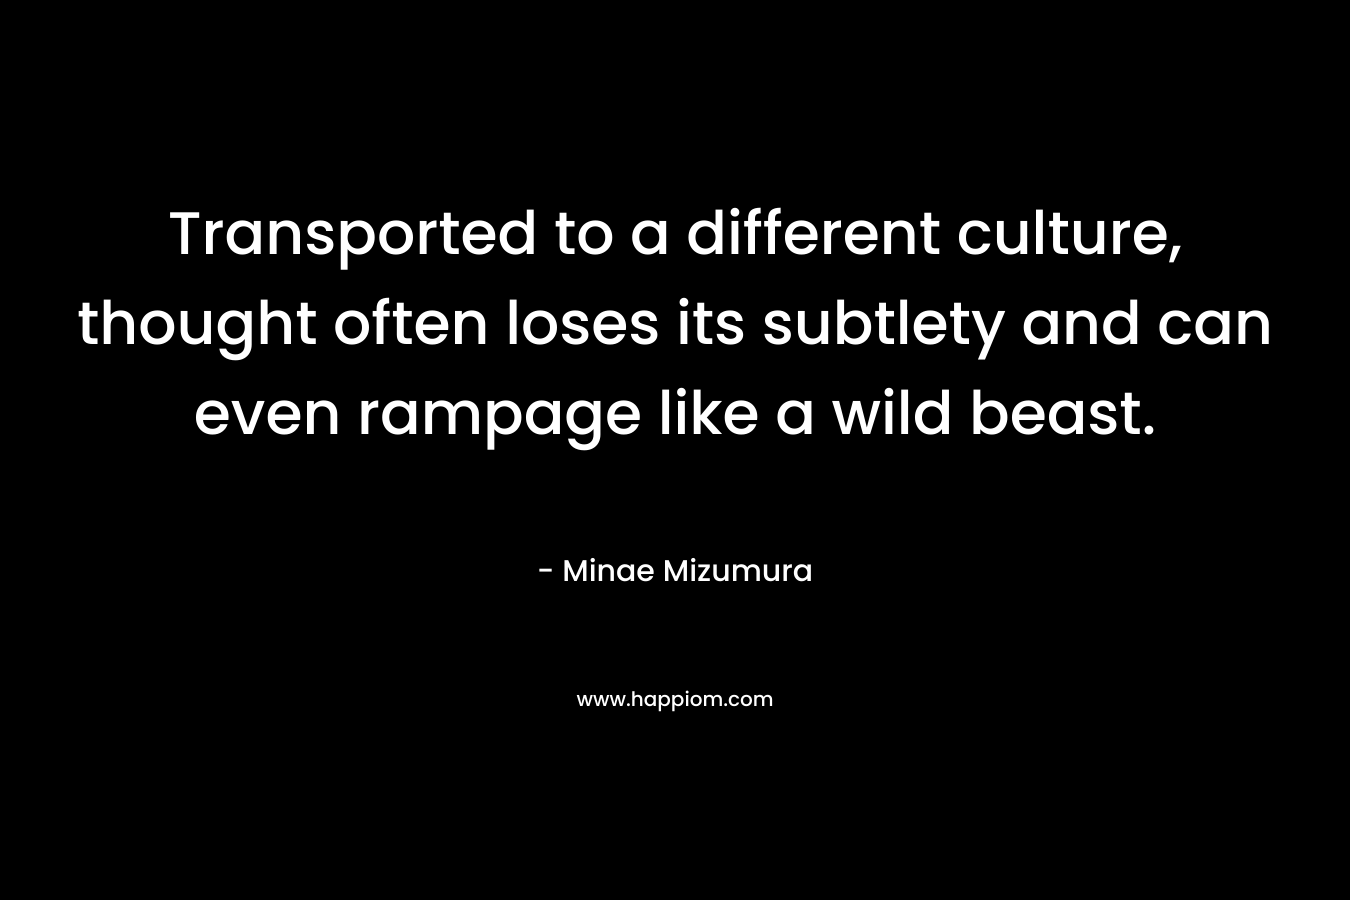 Transported to a different culture, thought often loses its subtlety and can even rampage like a wild beast.